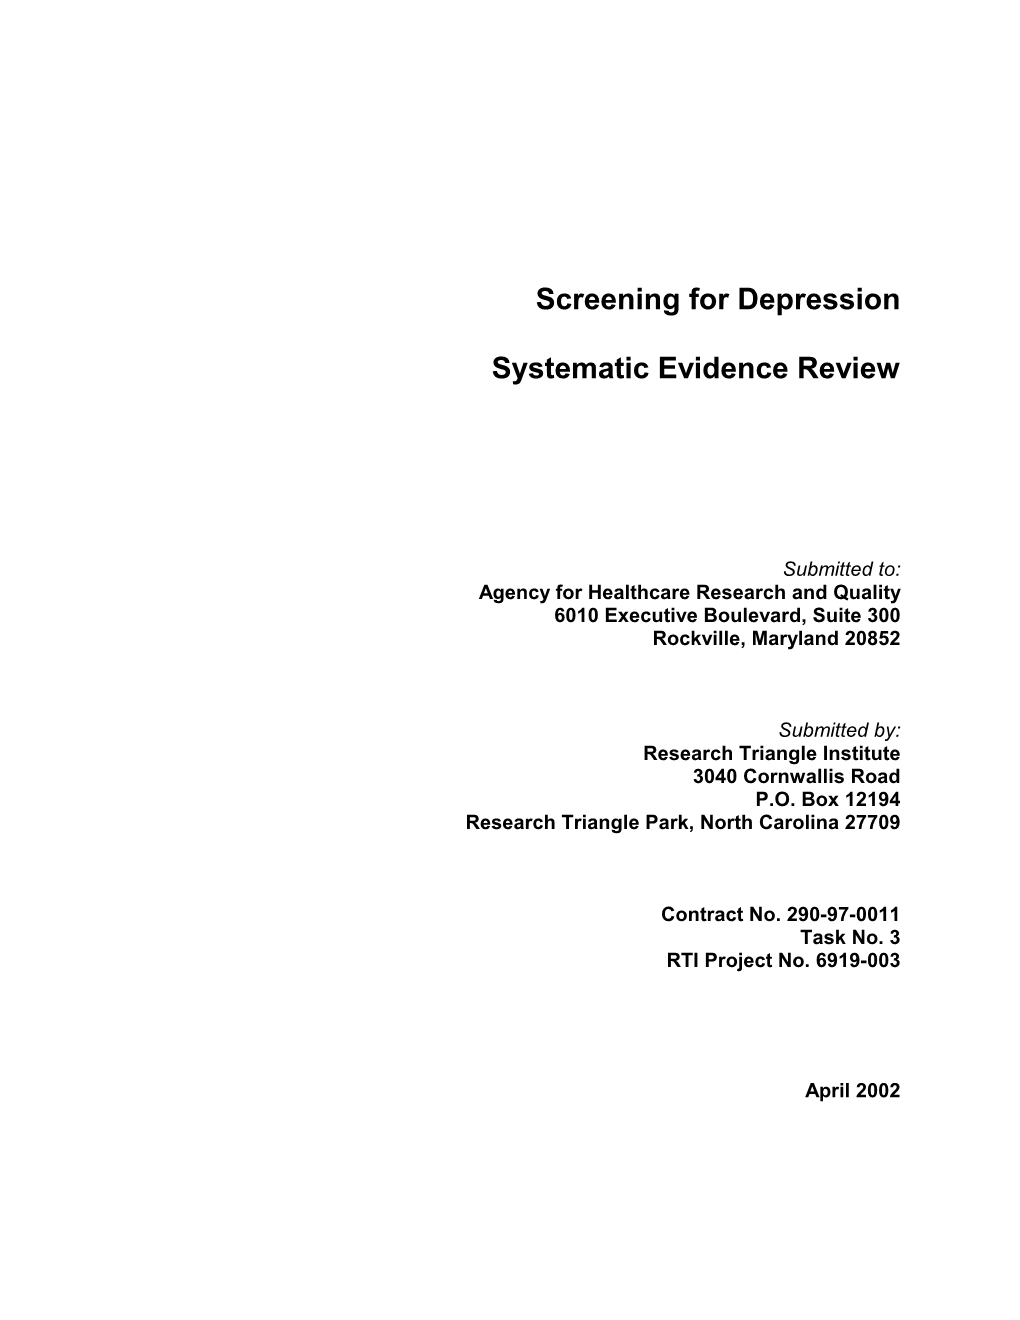 Screening for Depression: Systematic Evidence Review